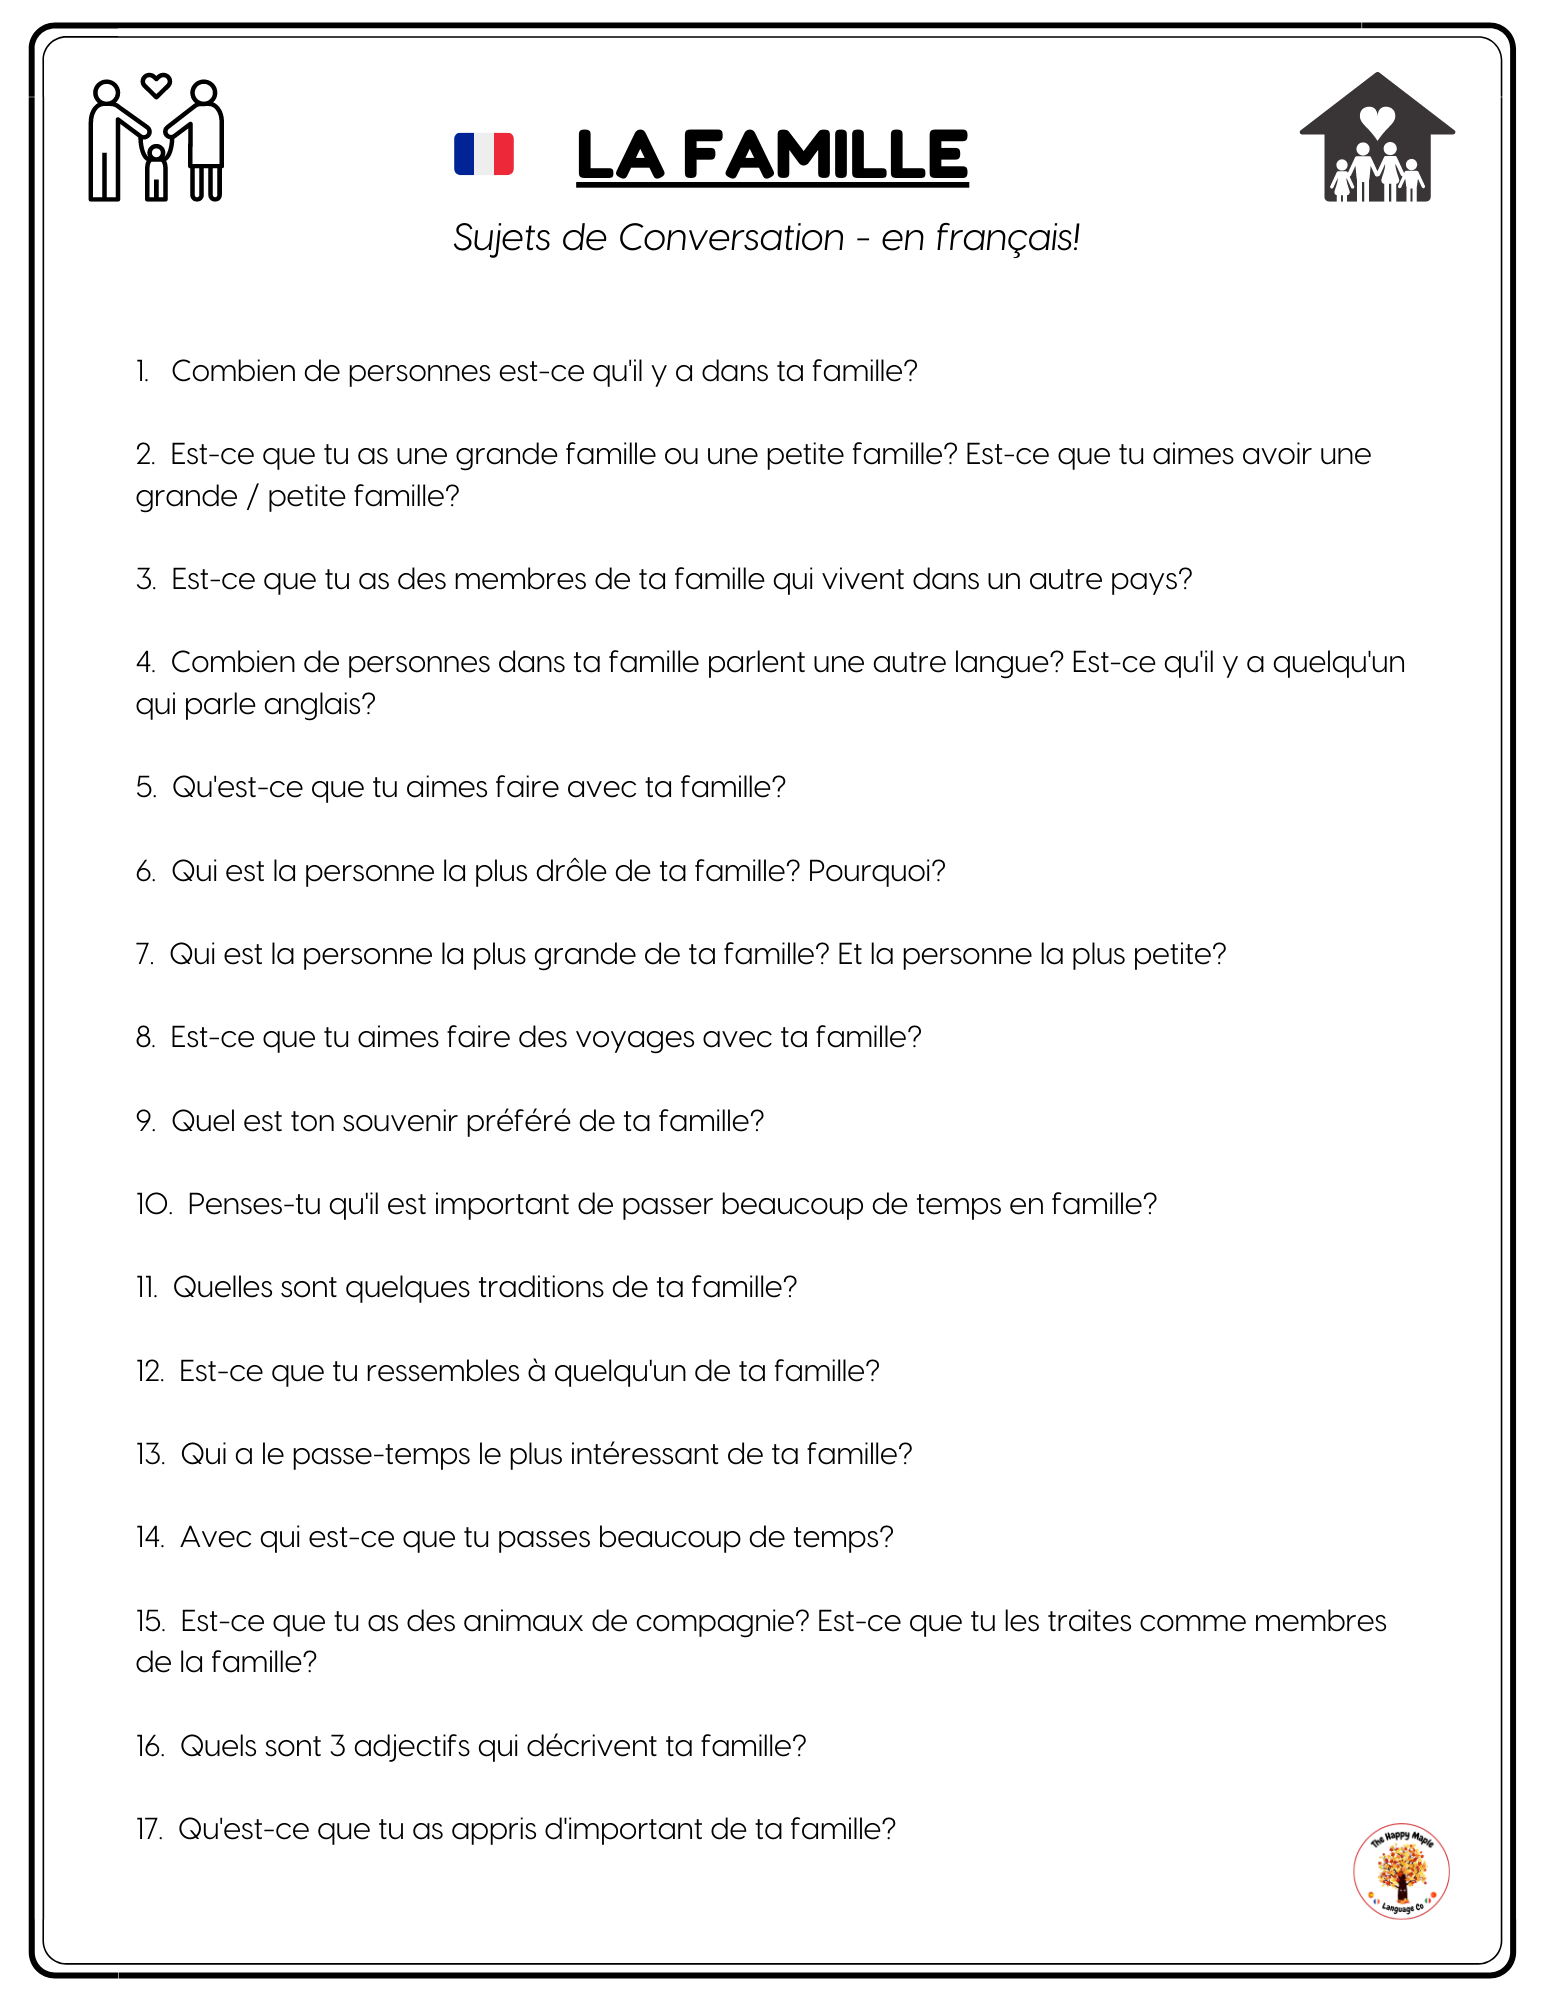 French Conversation Questions about Family / La famille Free PDF Download Printable File